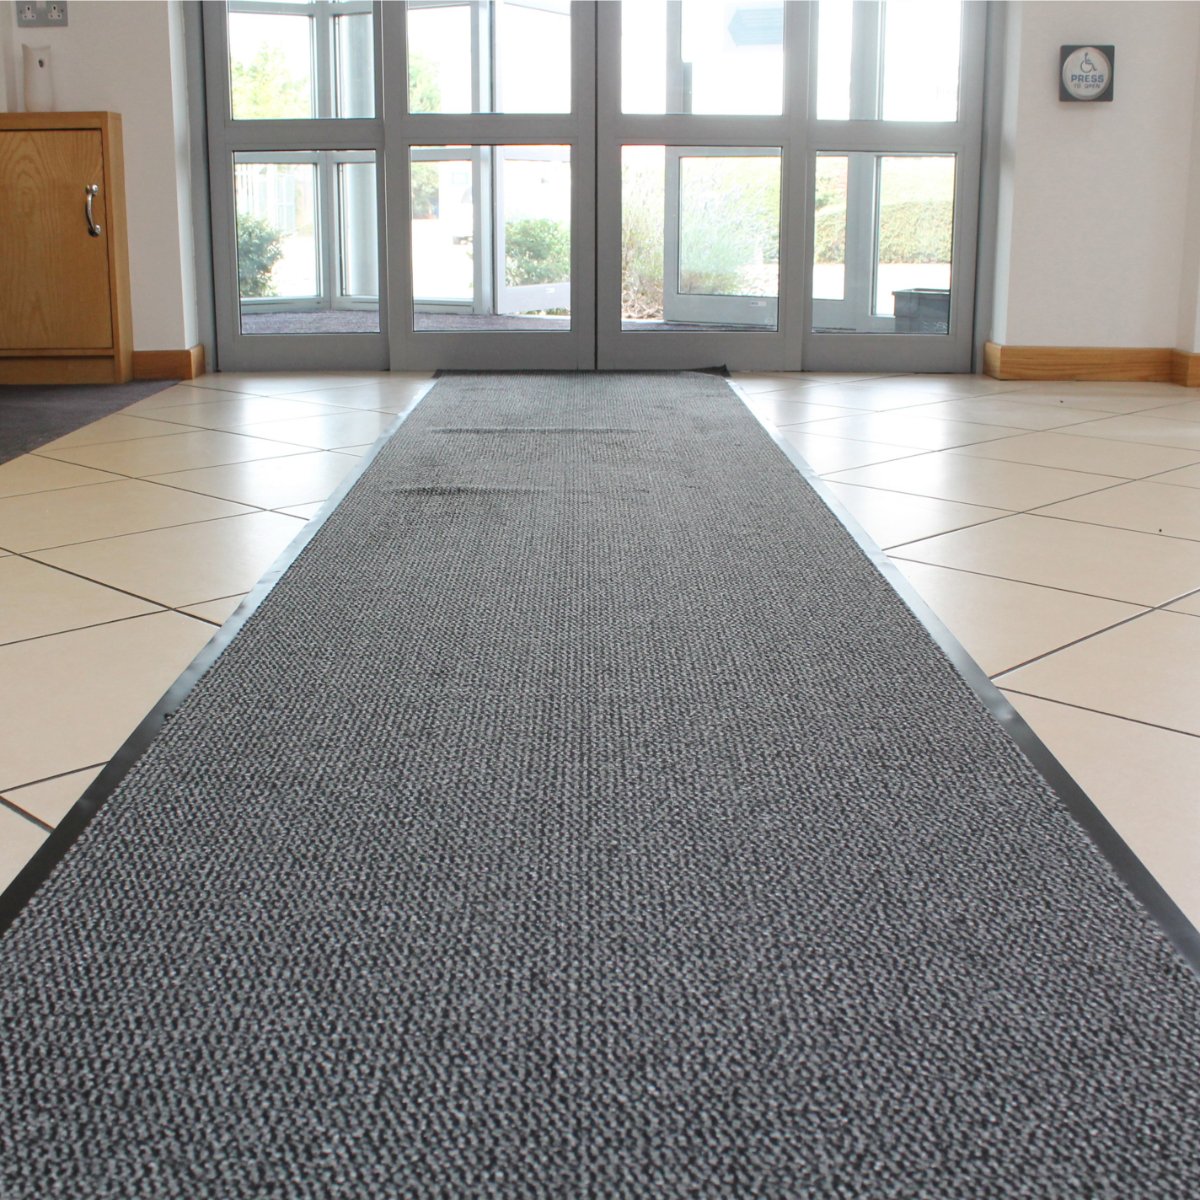 Large and Extra Large Door Mats - Buy Online